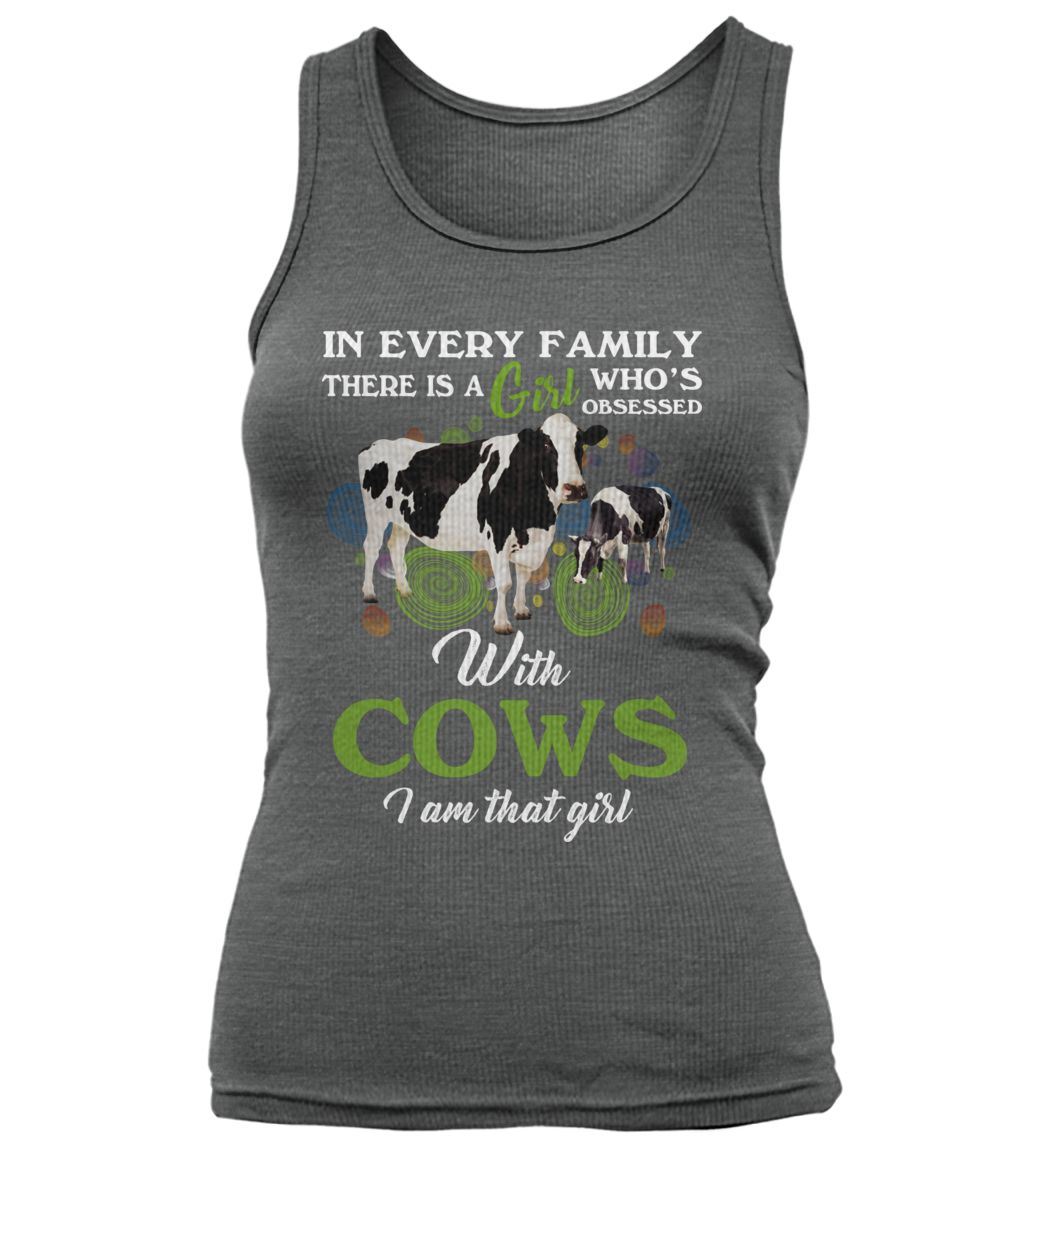 In every family there is a girl who's obsessed with cows I am that girl women's tank top